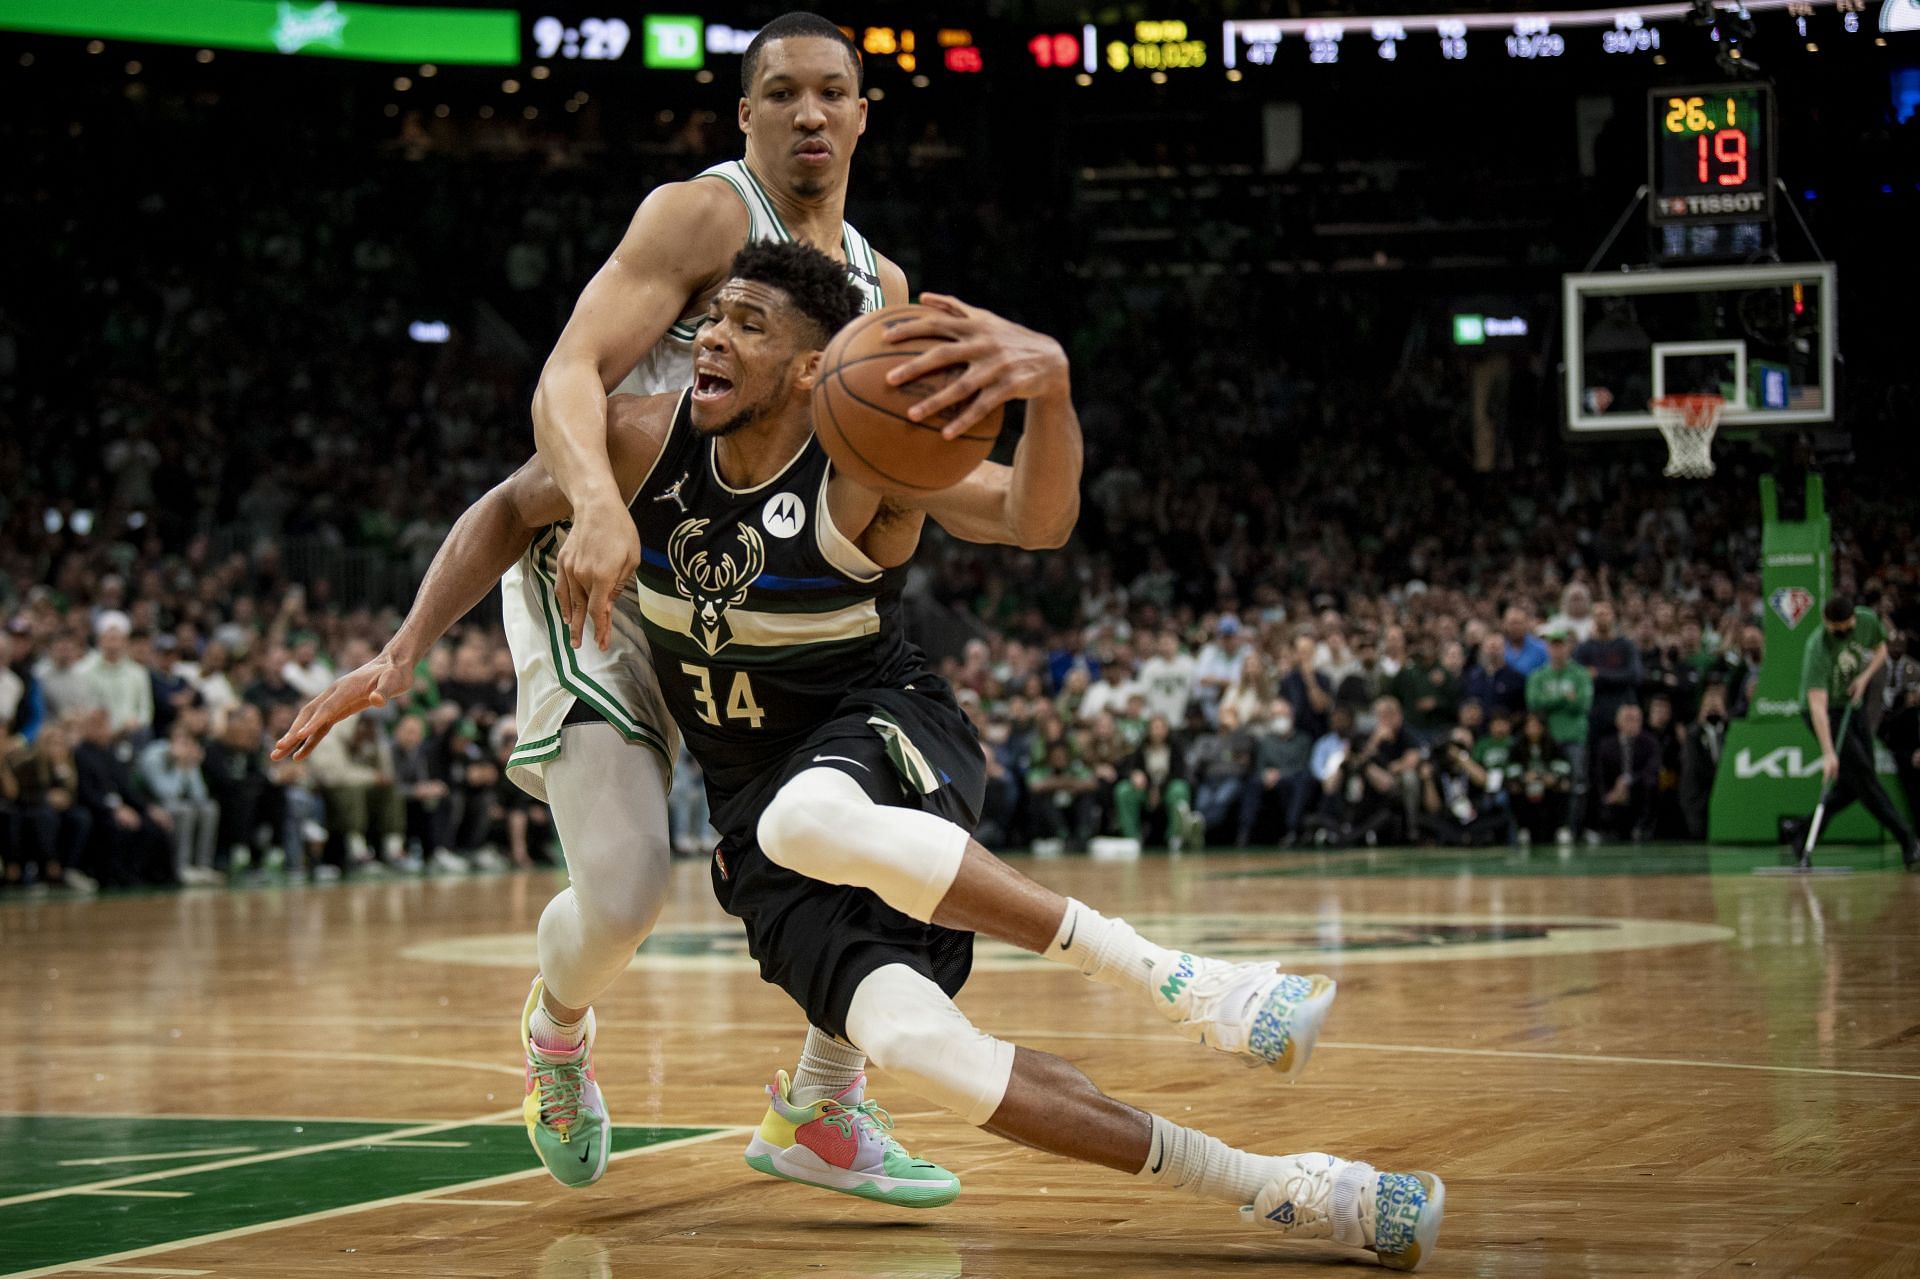 Giannis put up 40 points to power Milwaukee to a 3-2 series lead.